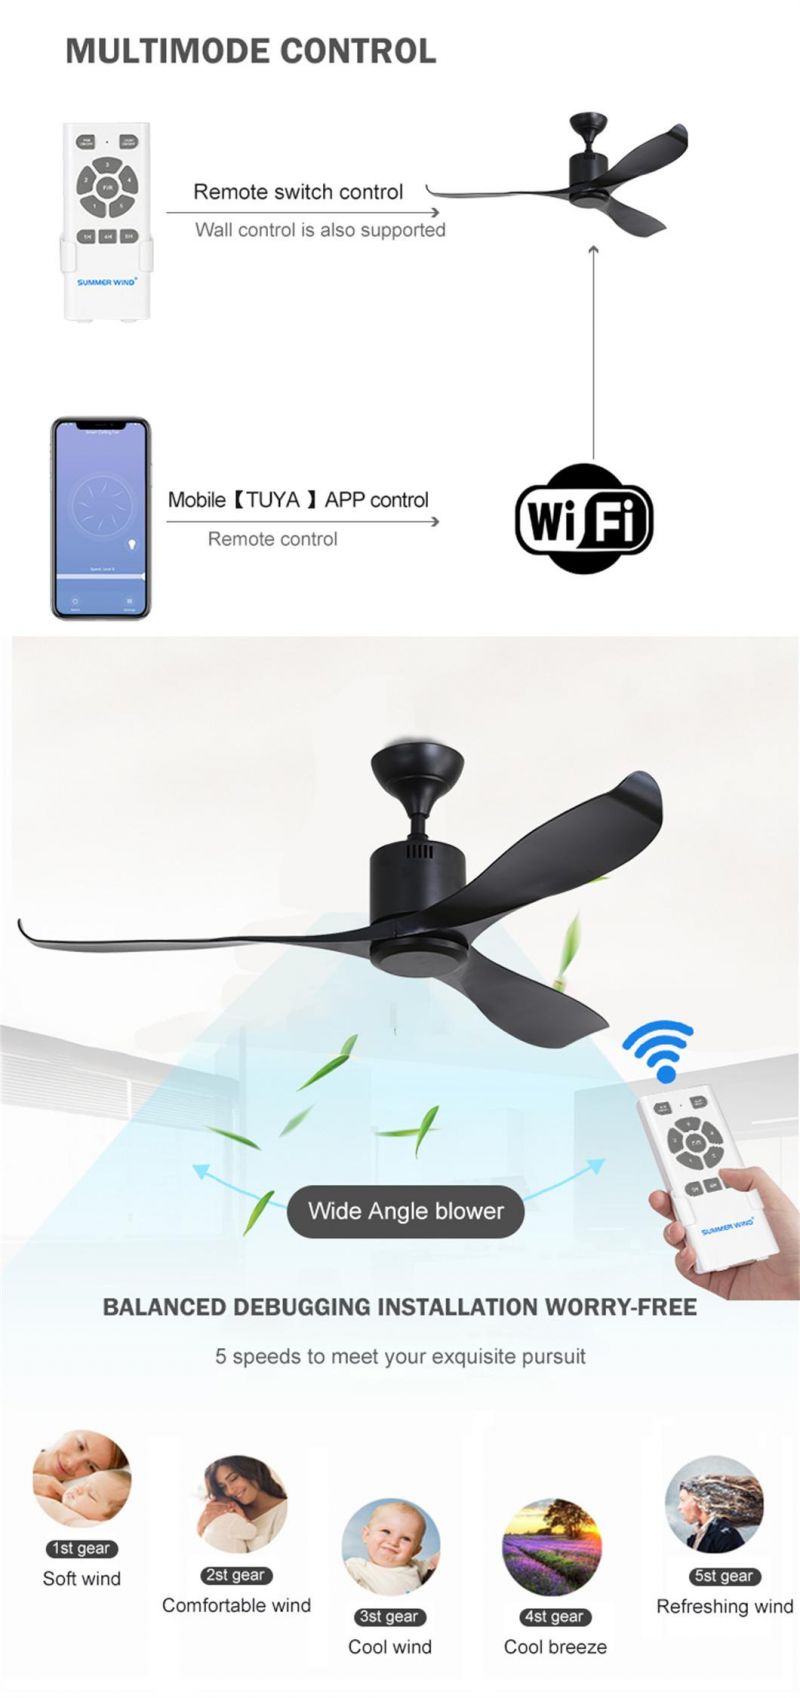 Simple Design Save Energy Silent 3 Fan Speed 56 Inch ABS Blade Light Ceiling Fan